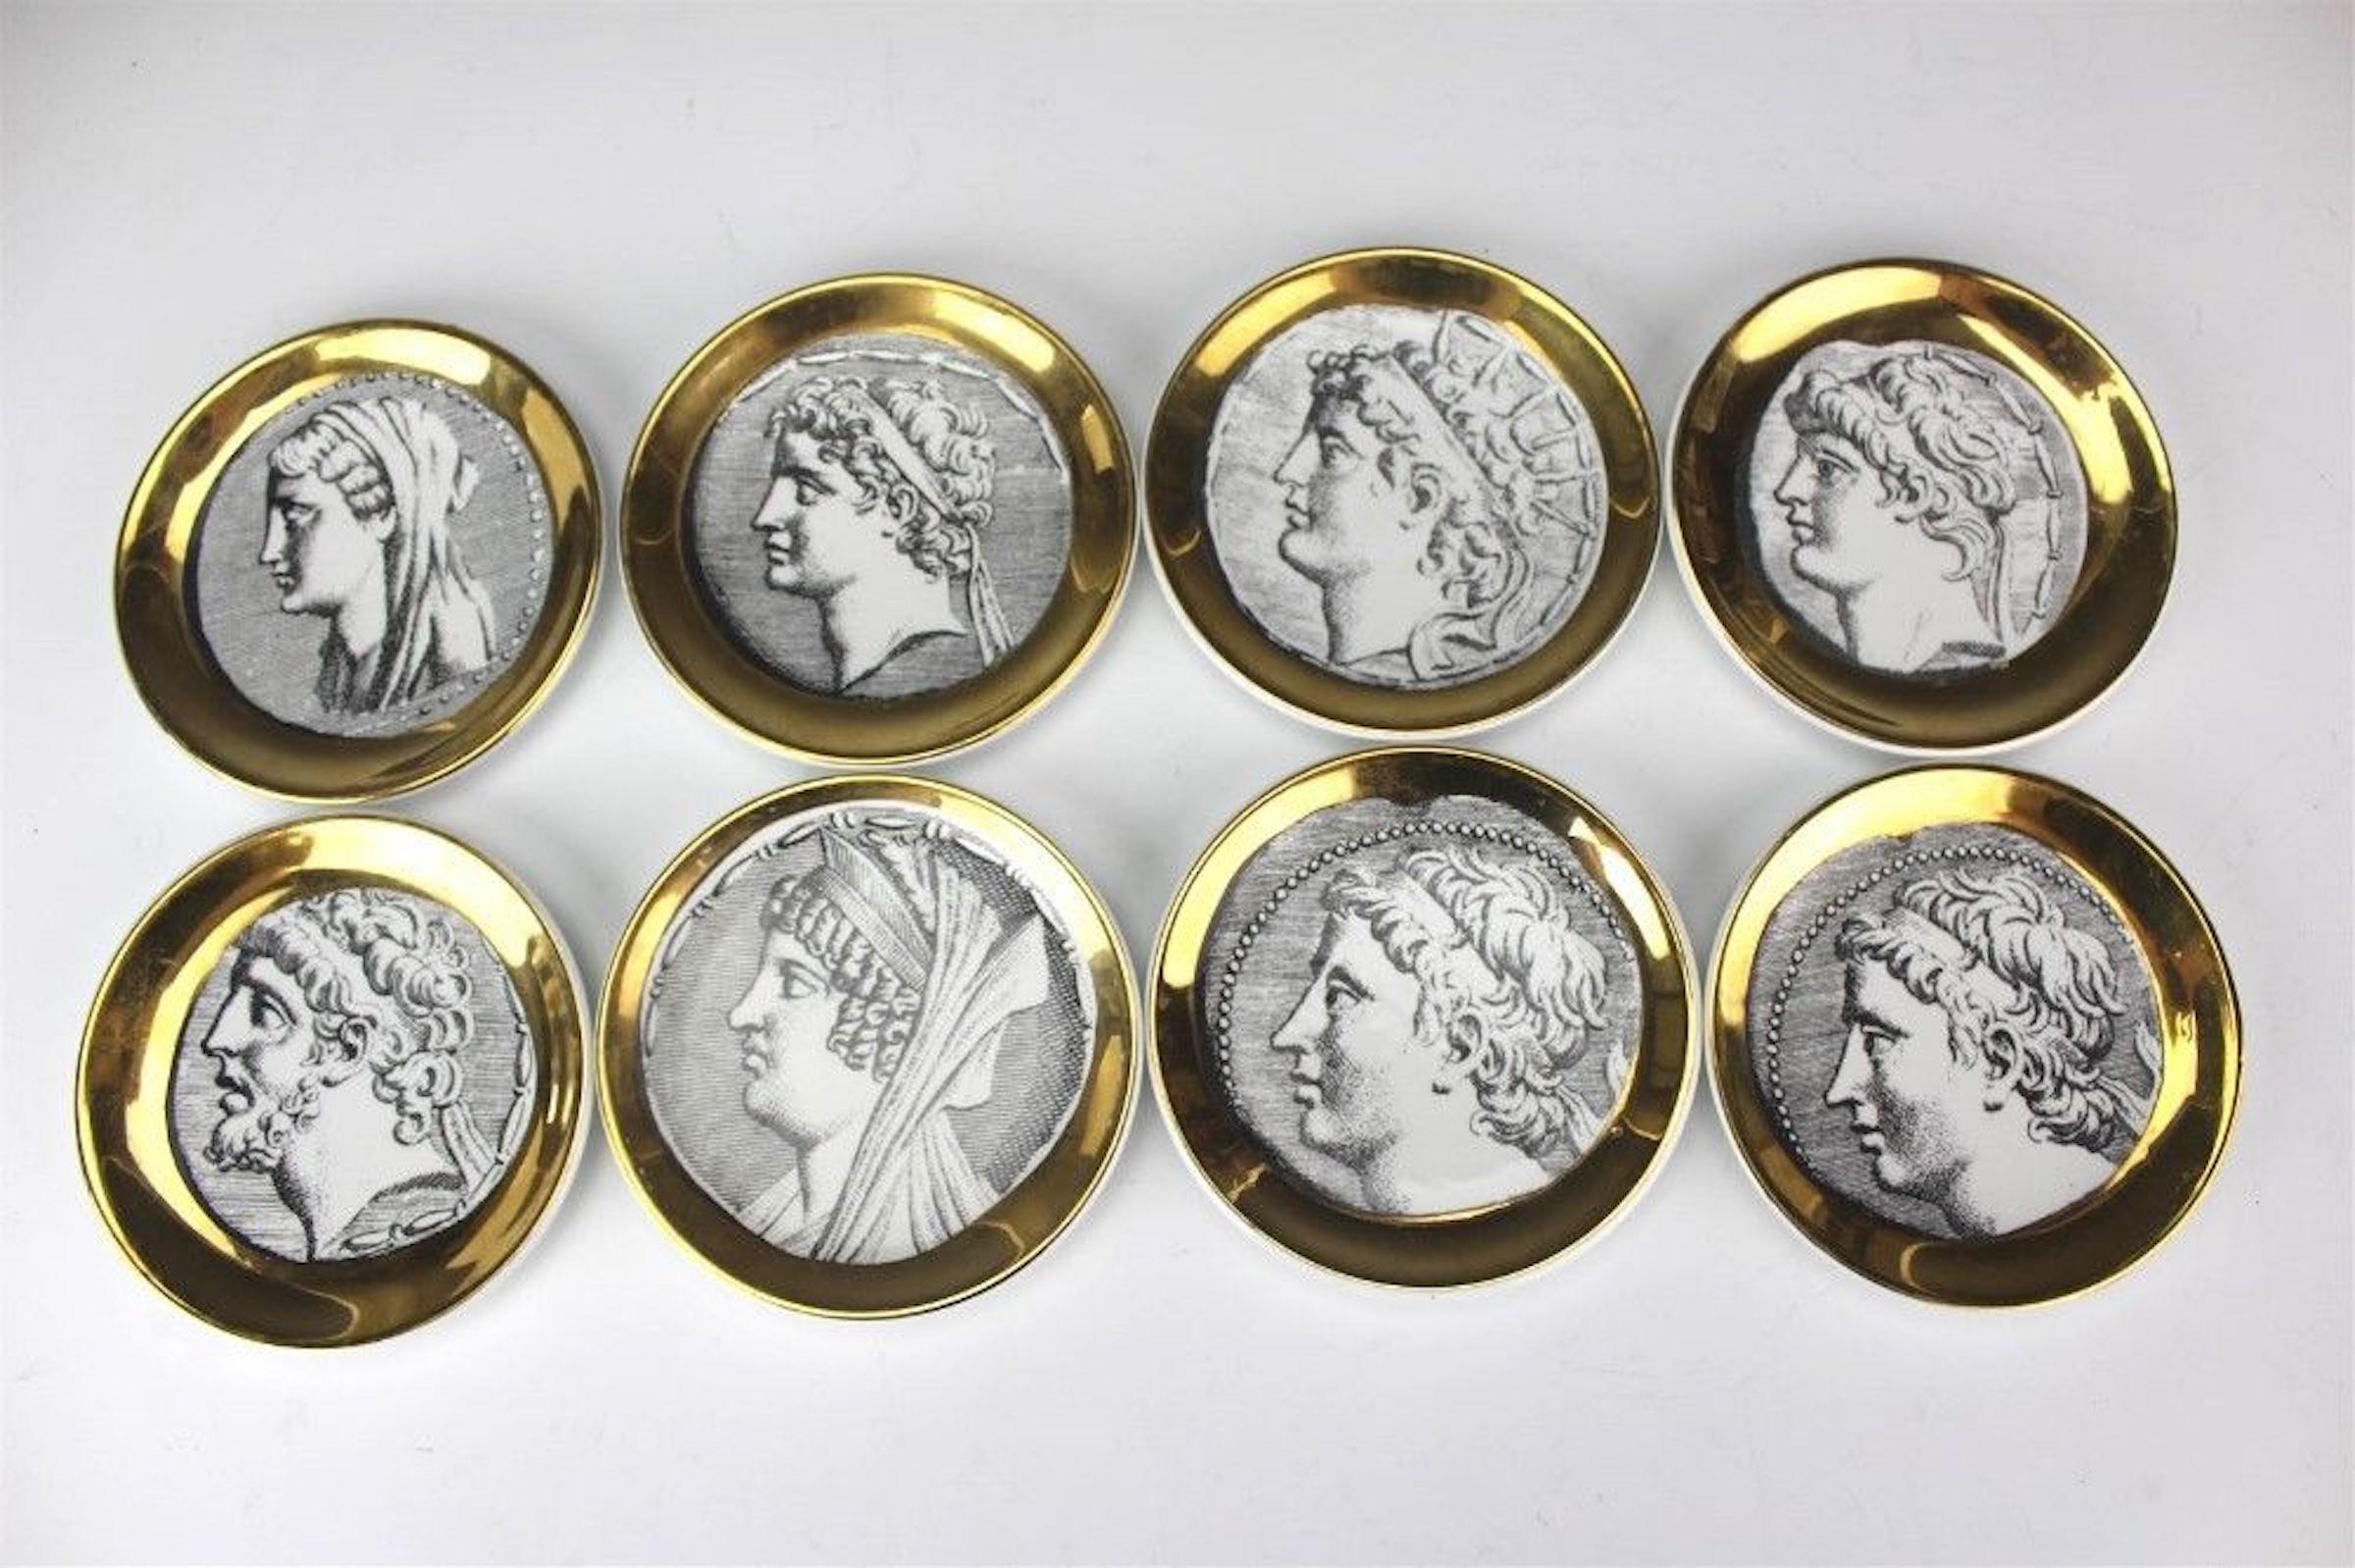 Eight Italian Mid-Century Modern Fornasetti Roman portrait coasters, each one with a different portrait head with gilt rims, signed Fornasetti Milano, Made In Italy, Monete. No chips, cracks or repairs. Each one has a 4